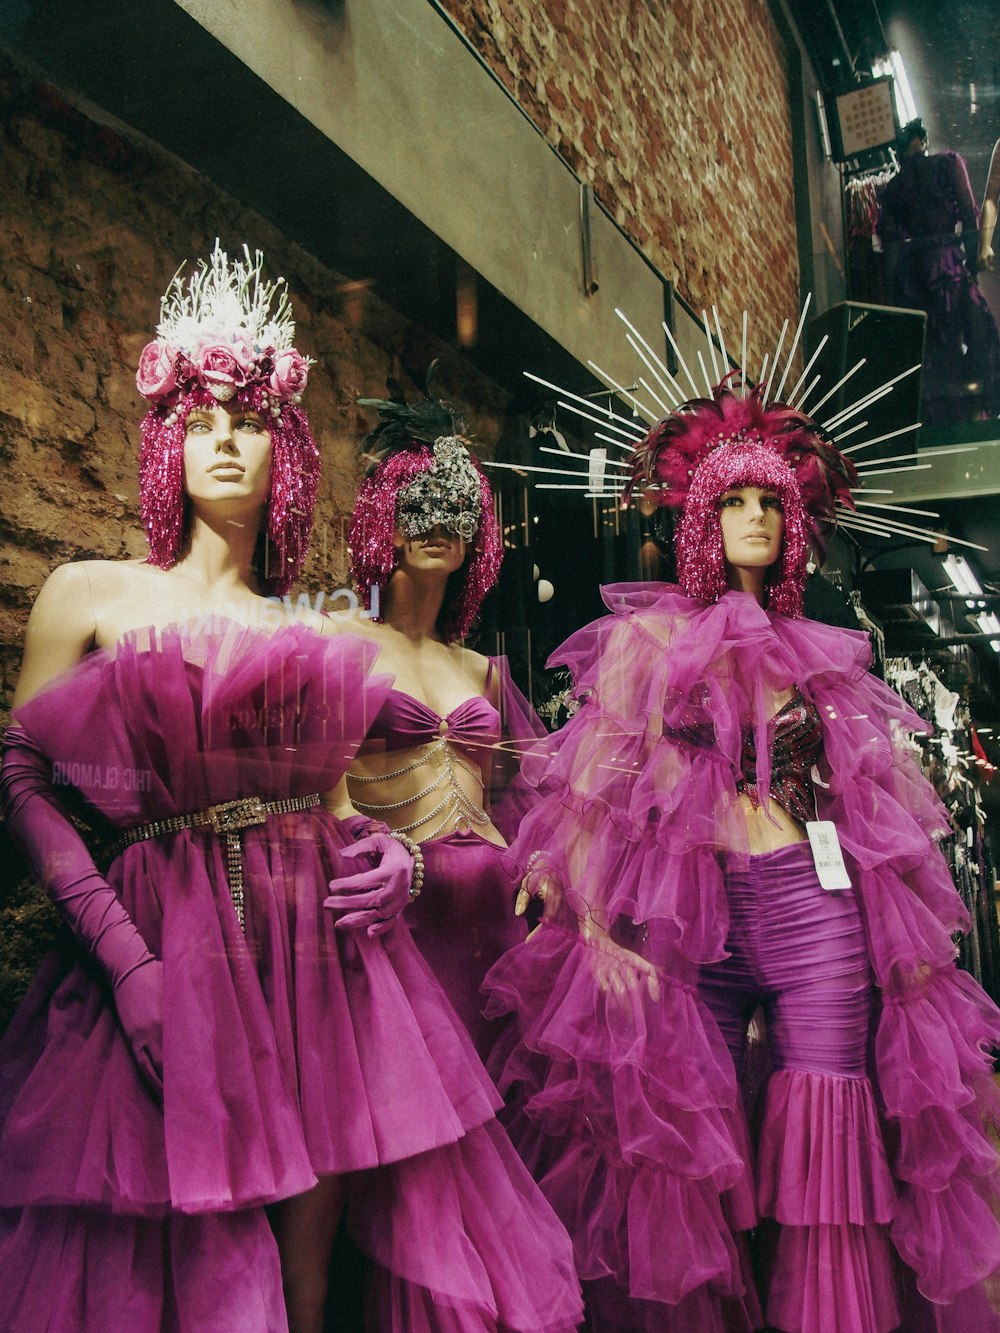 three mannequins dressed in purple dresses and headpieces